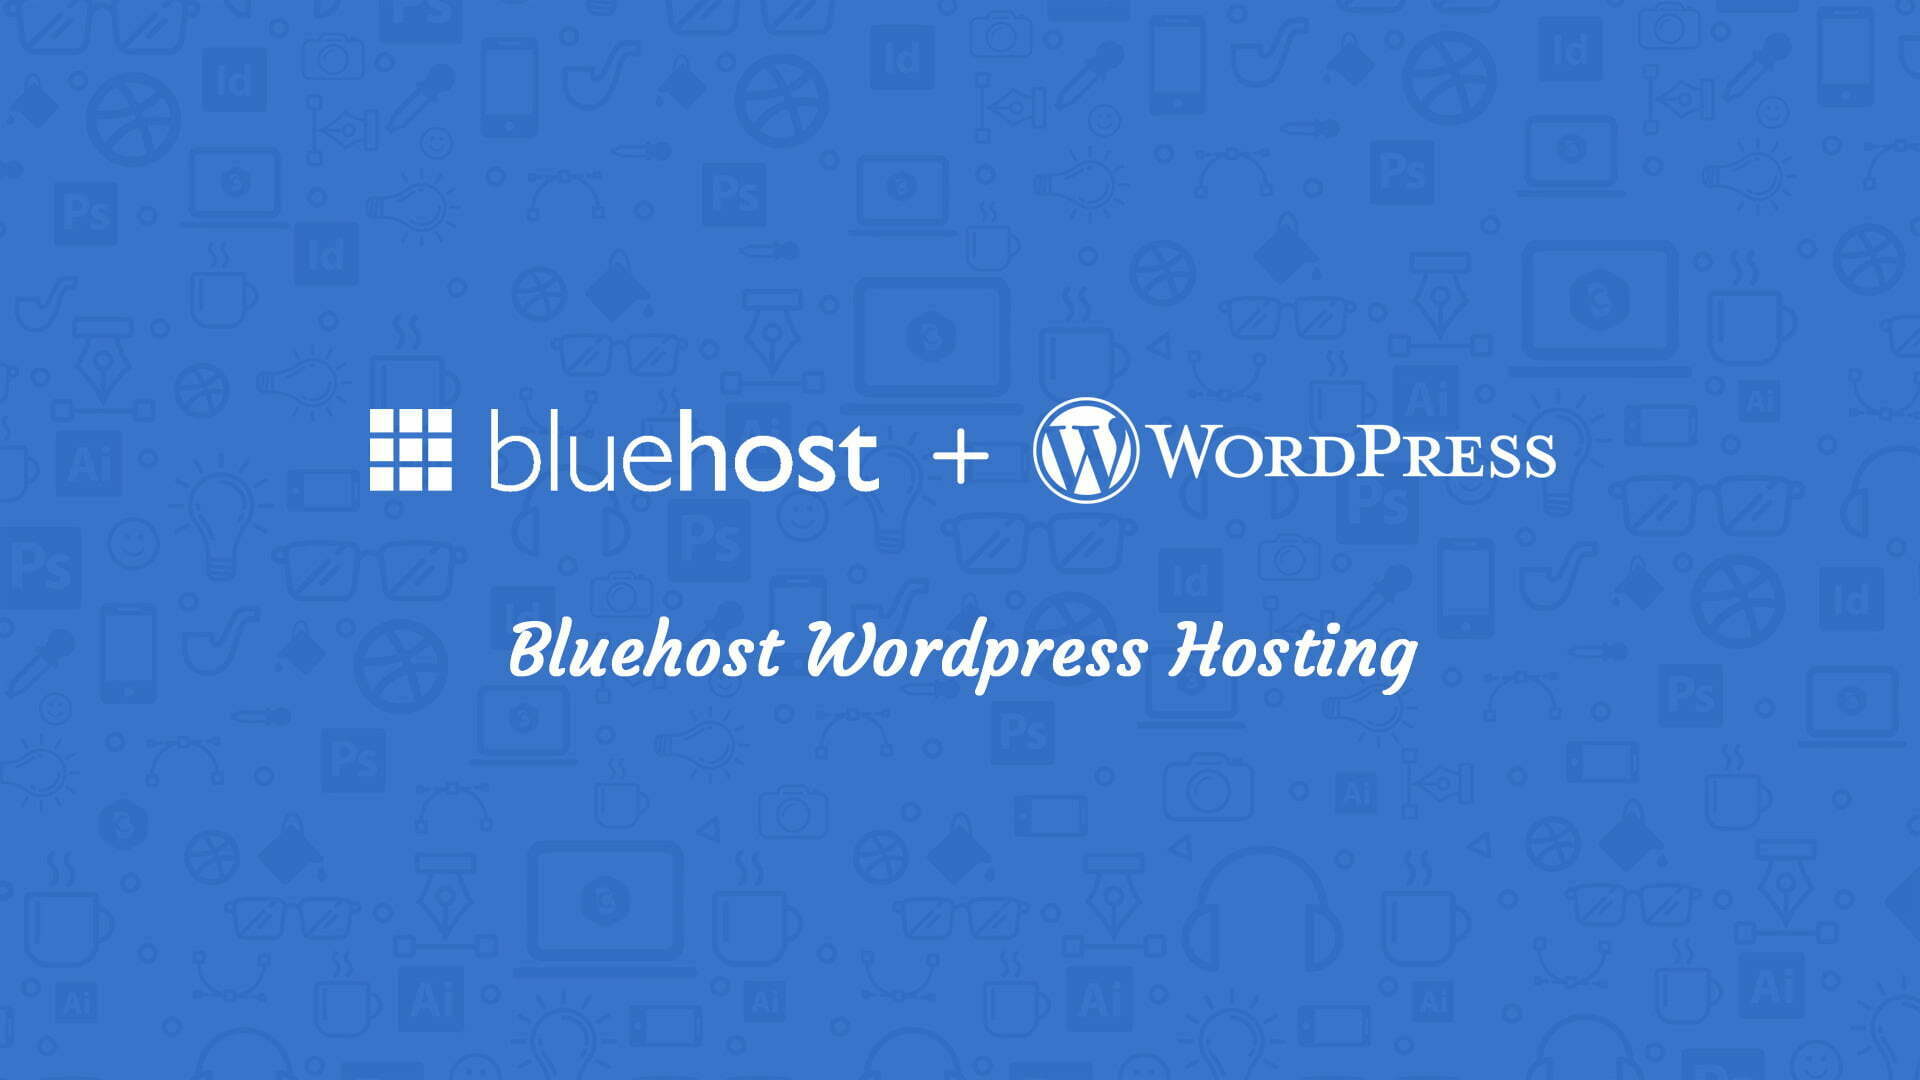 Grab Bluehost Wordpress Hosting Deal Code Briefly Images, Photos, Reviews